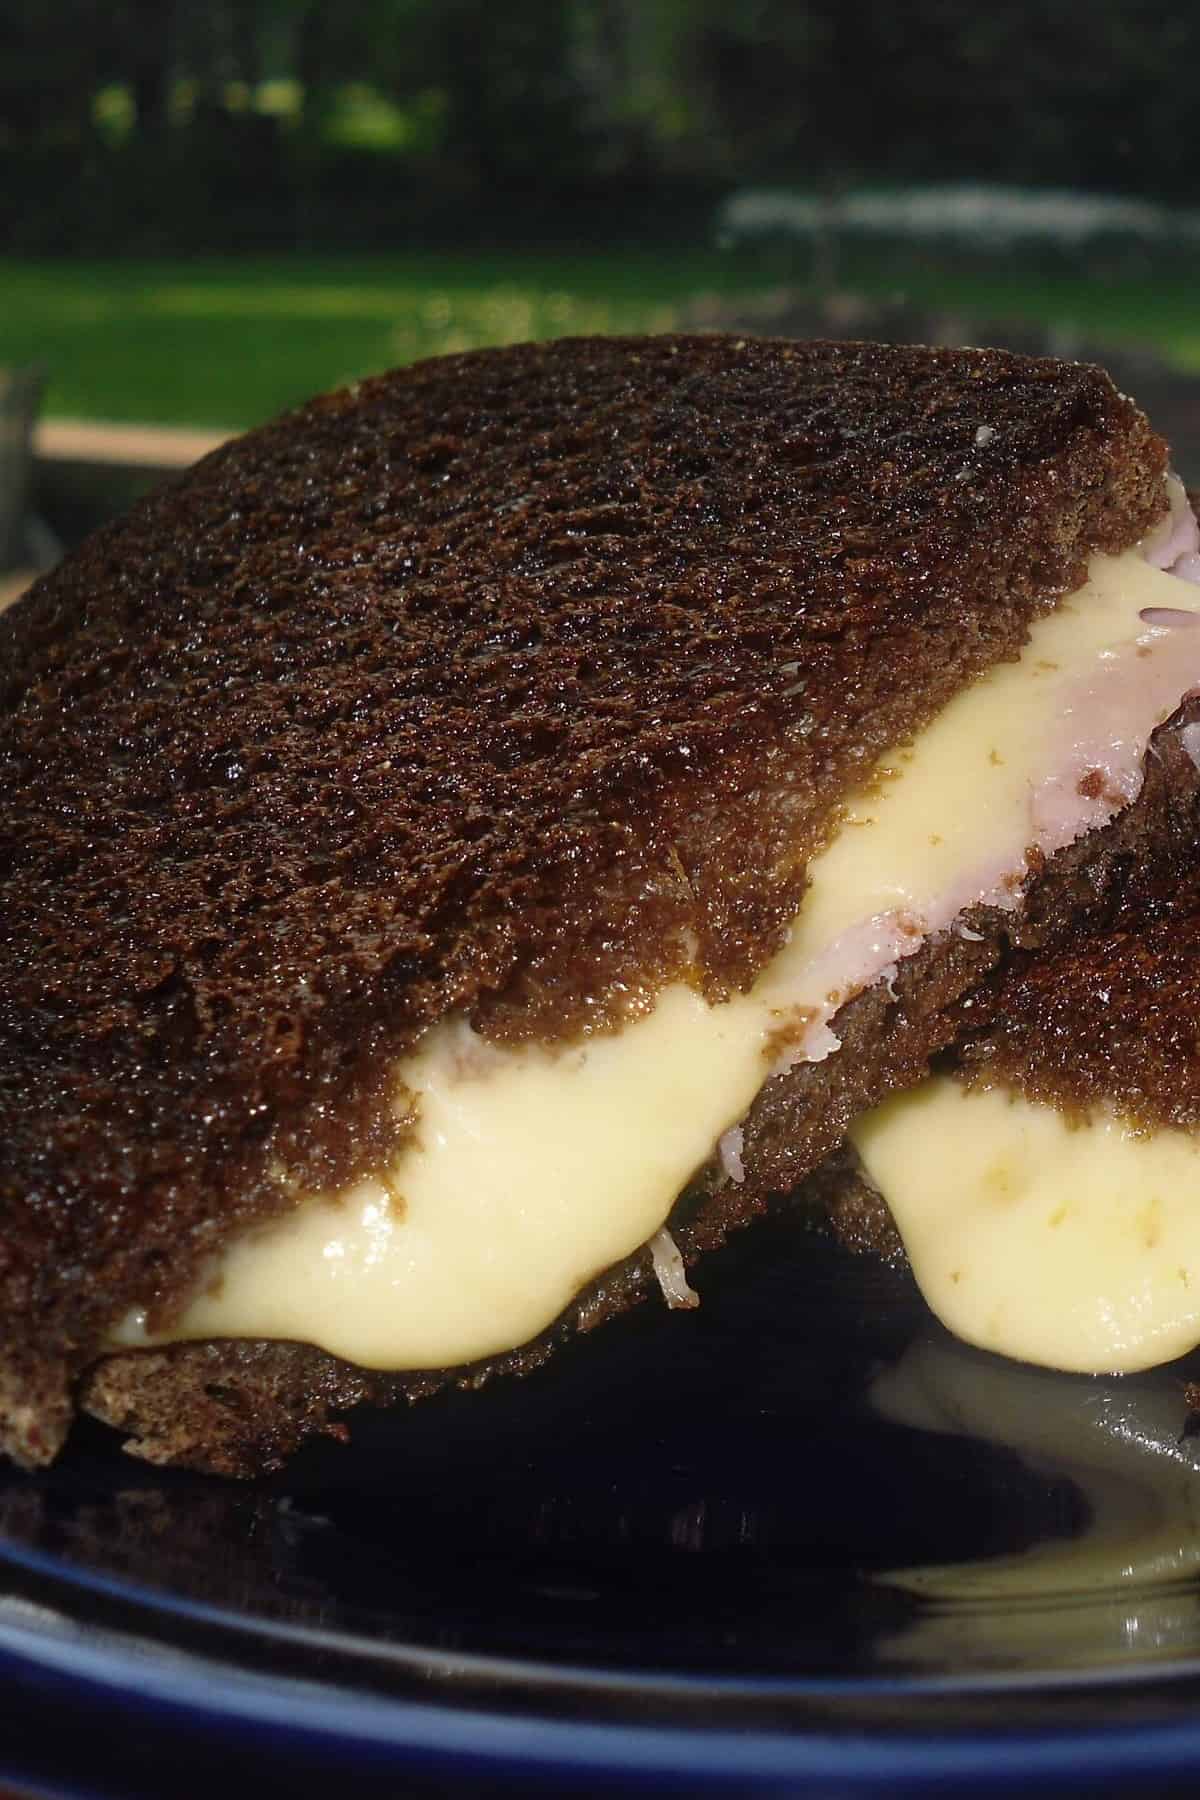 Grilled Gouda Cheese Sandwiches With Smoked Ham and Pumpernickel Recipe